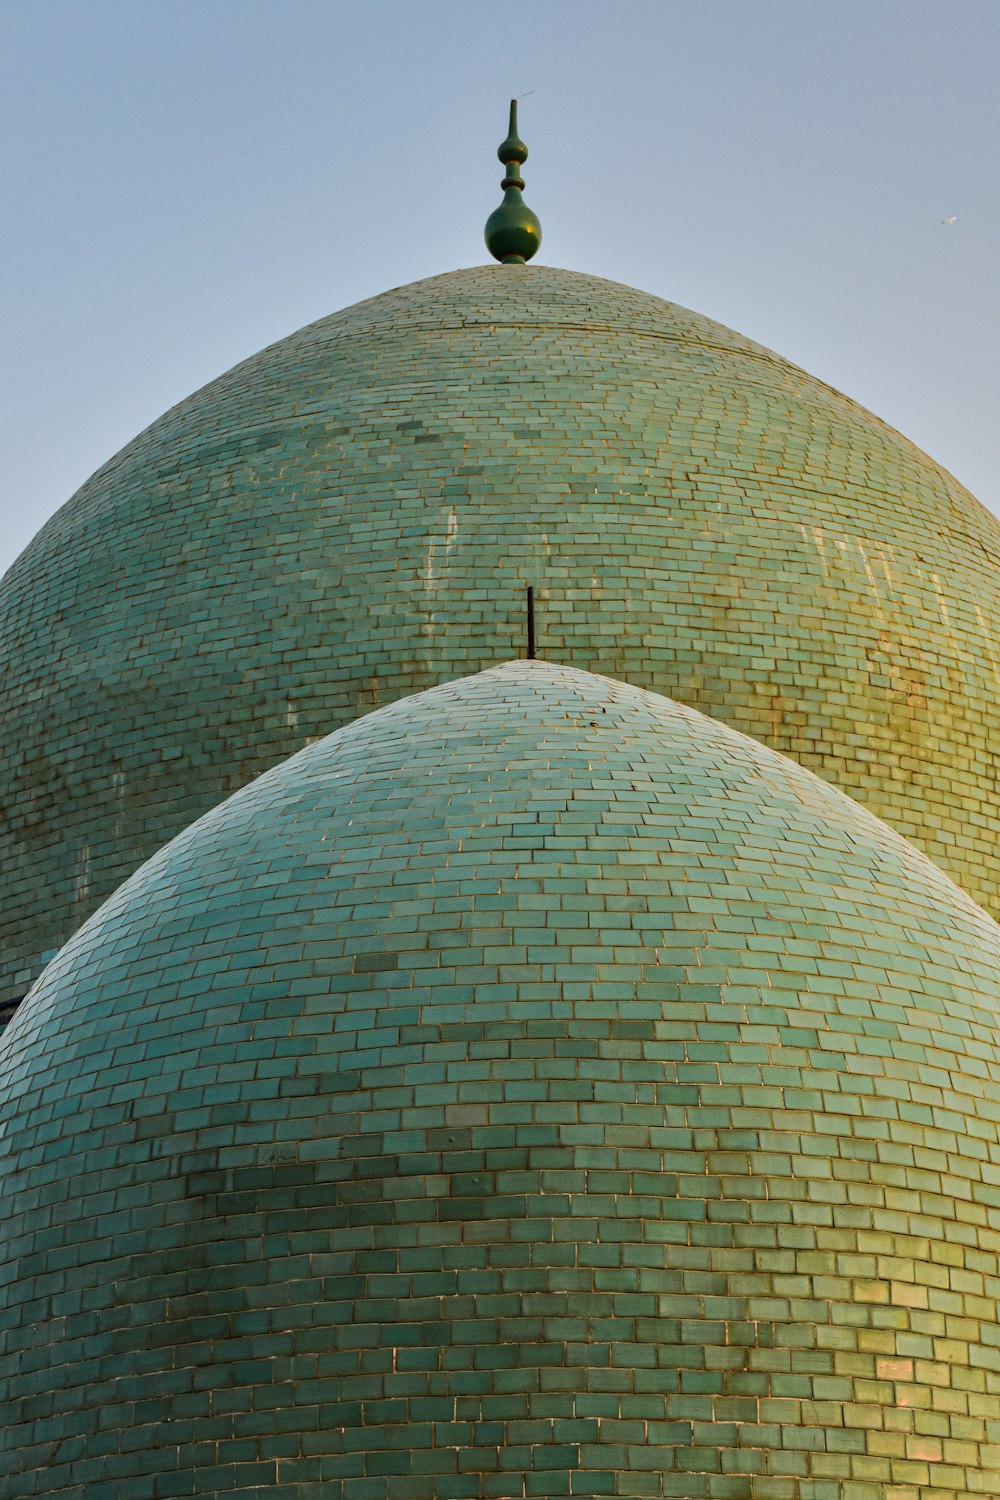 a large green dome with a cross on top of it